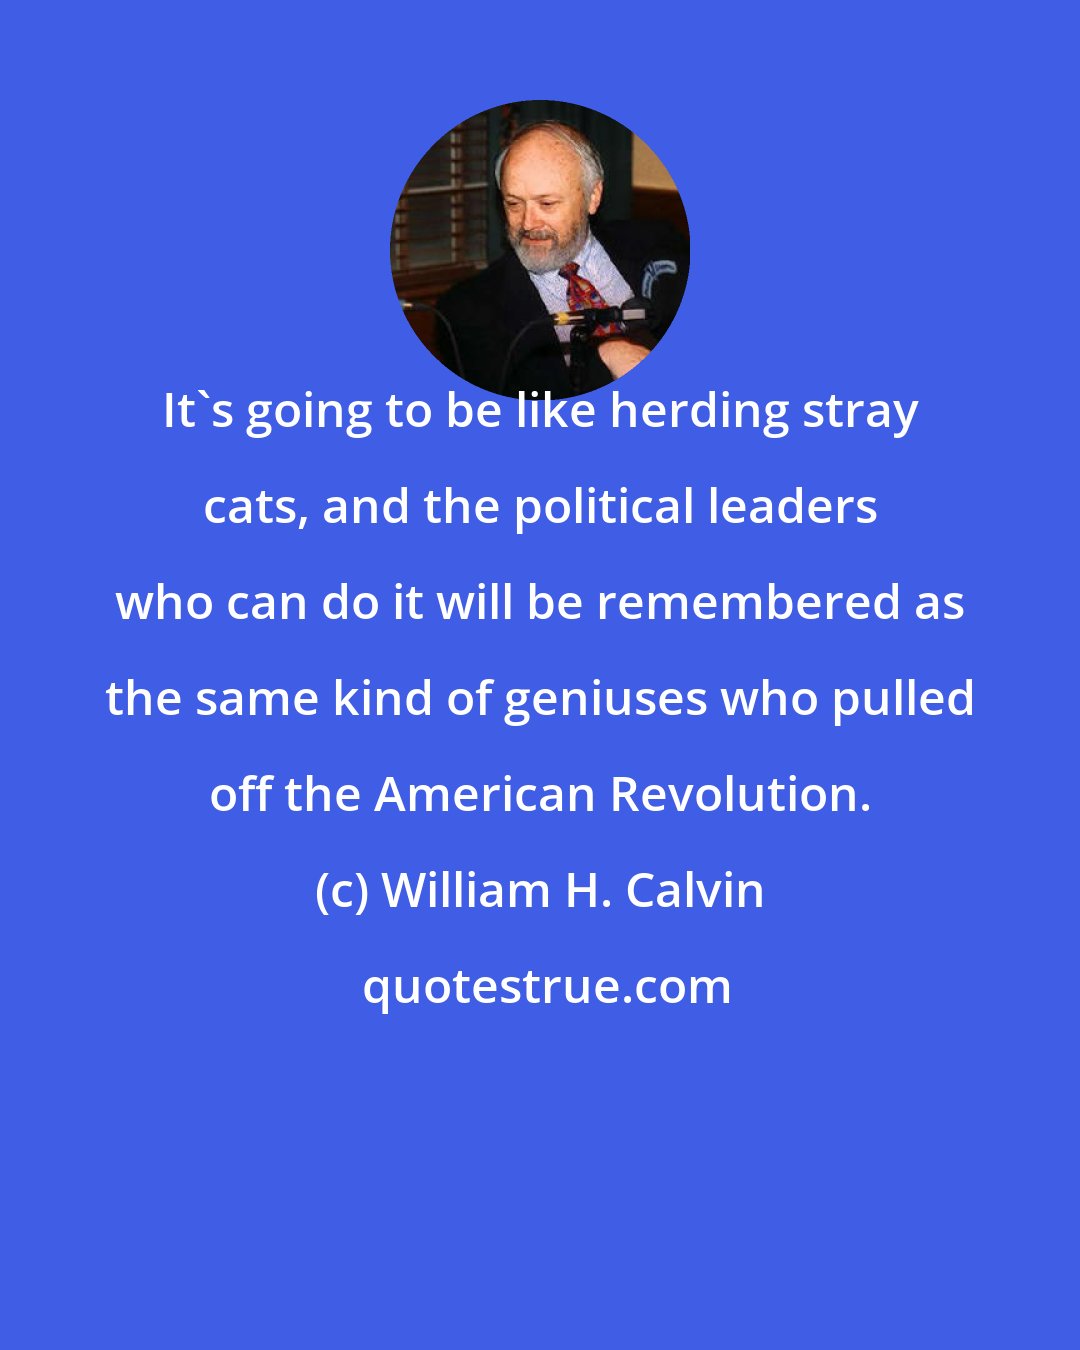 William H. Calvin: It's going to be like herding stray cats, and the political leaders who can do it will be remembered as the same kind of geniuses who pulled off the American Revolution.